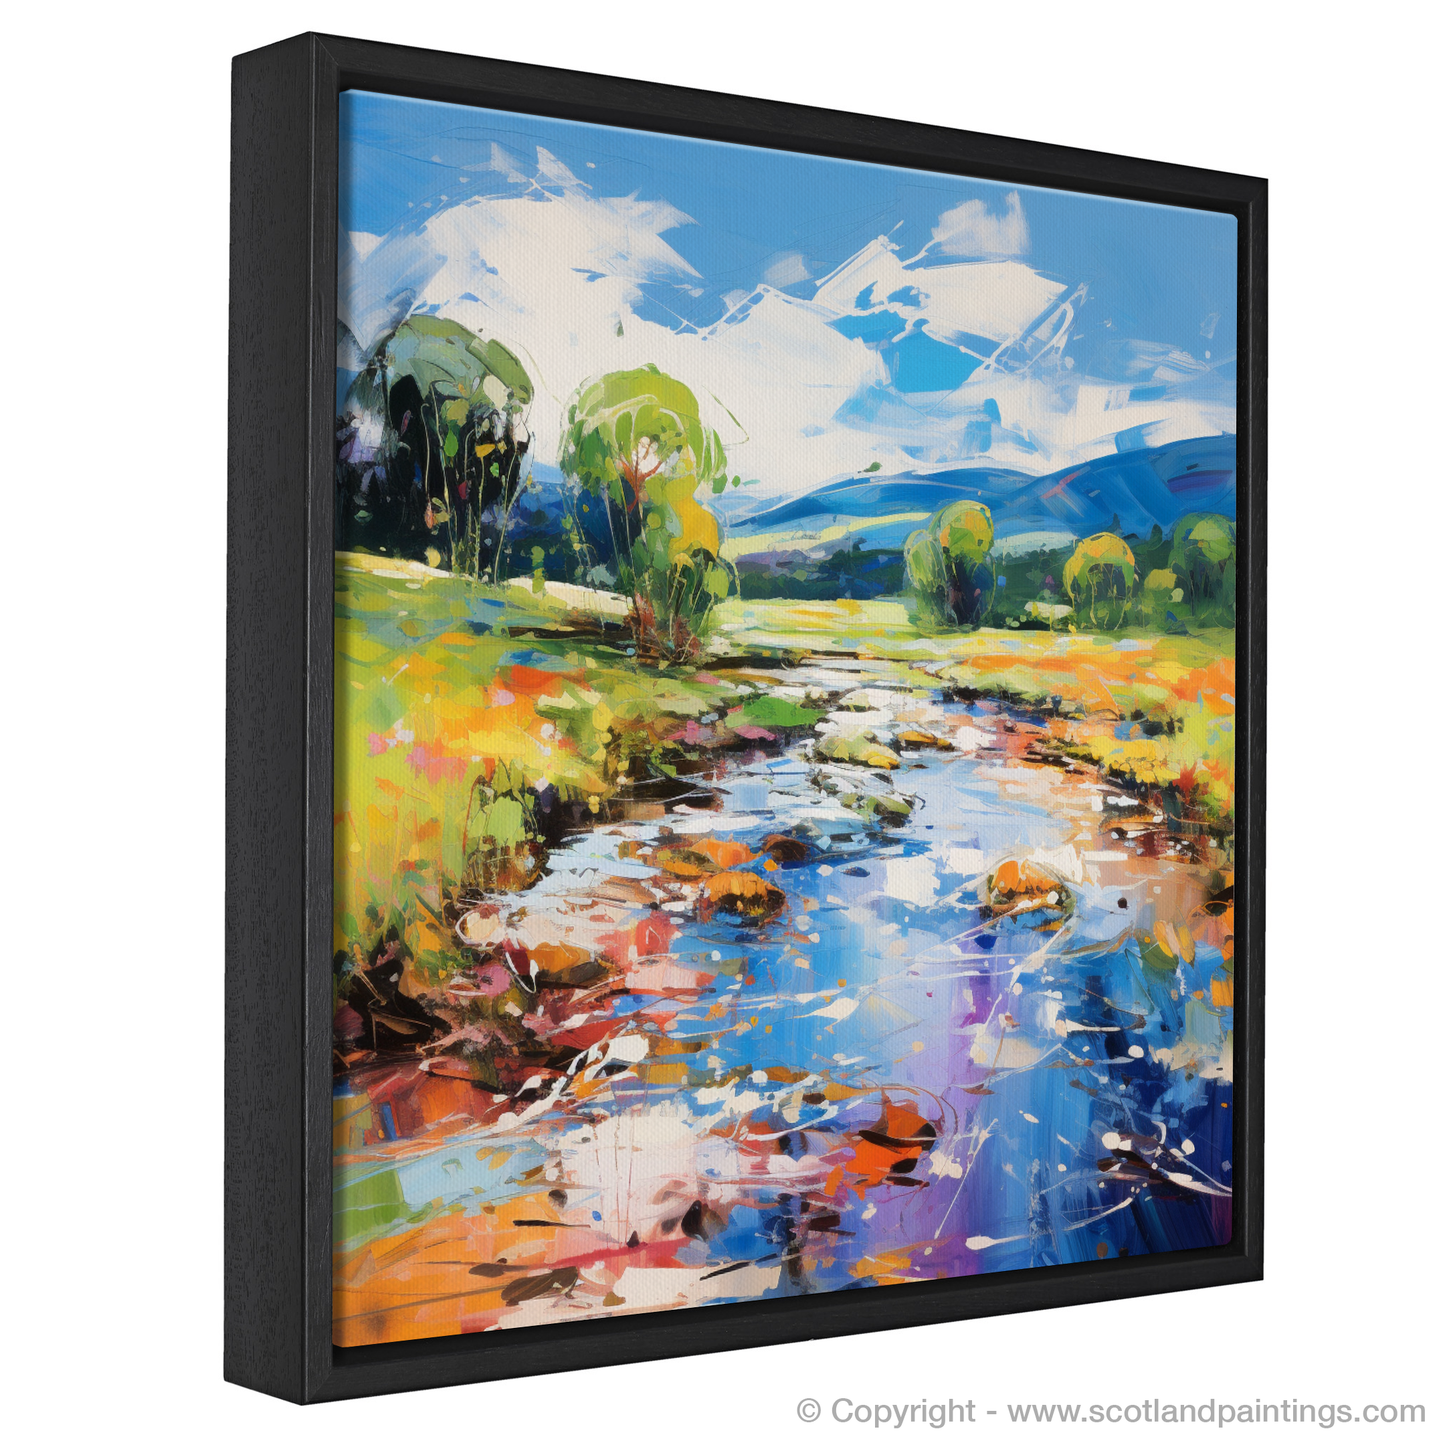 Painting and Art Print of River Carron, Ross-shire in summer entitled "Summer Symphony on River Carron".